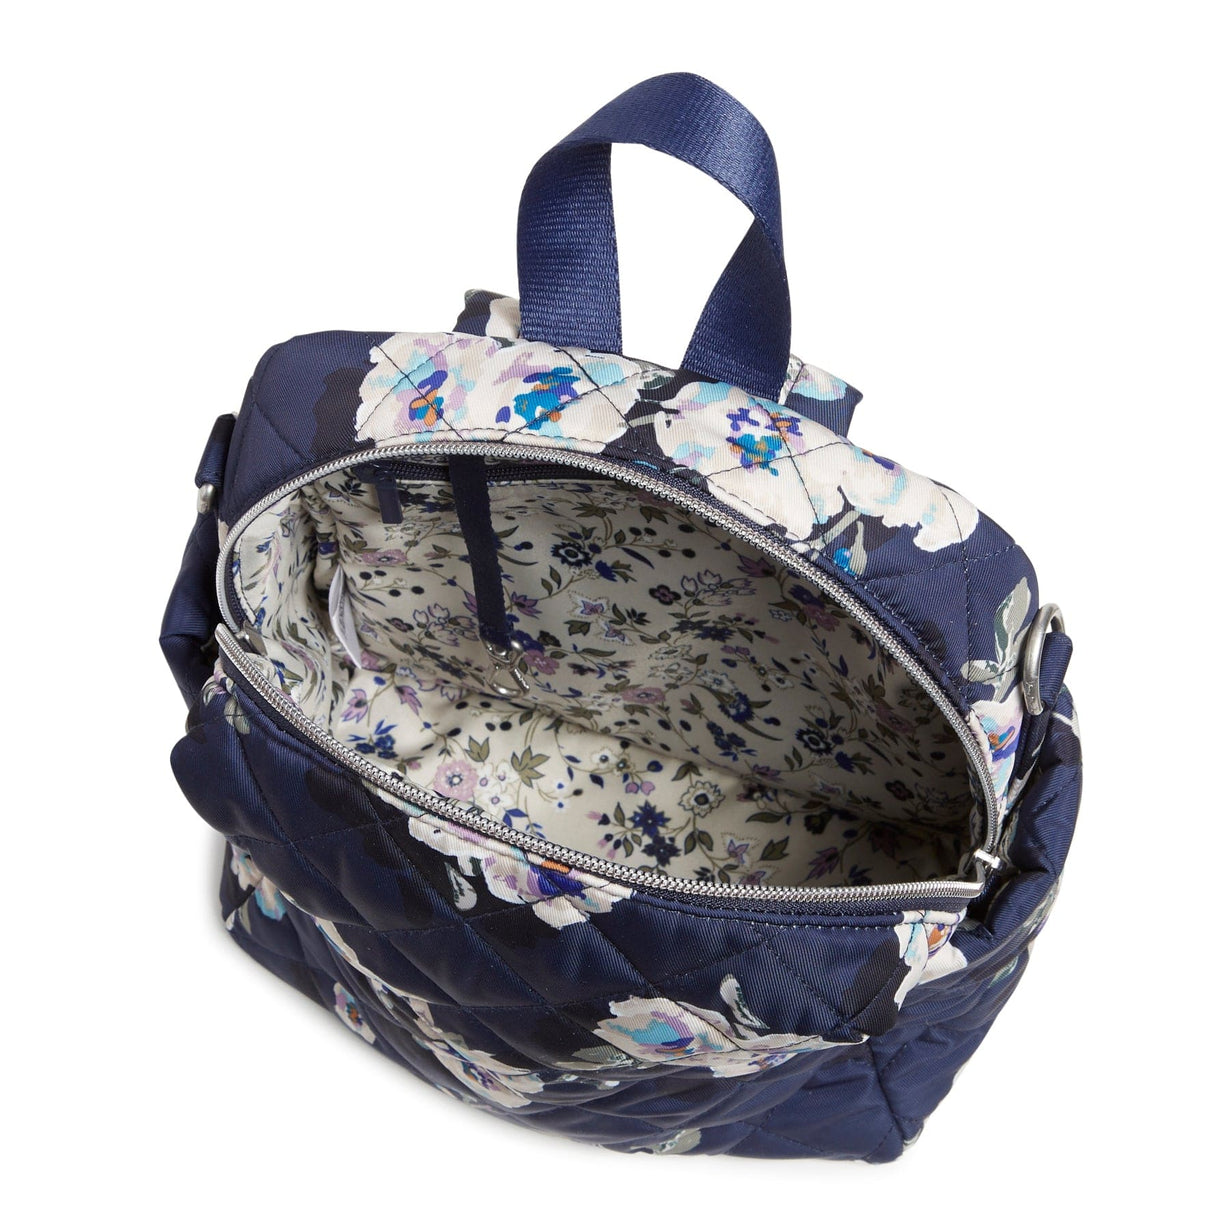 Blue Convertible Small Backpack - Blooms and Branches Navy | Vera Bradley